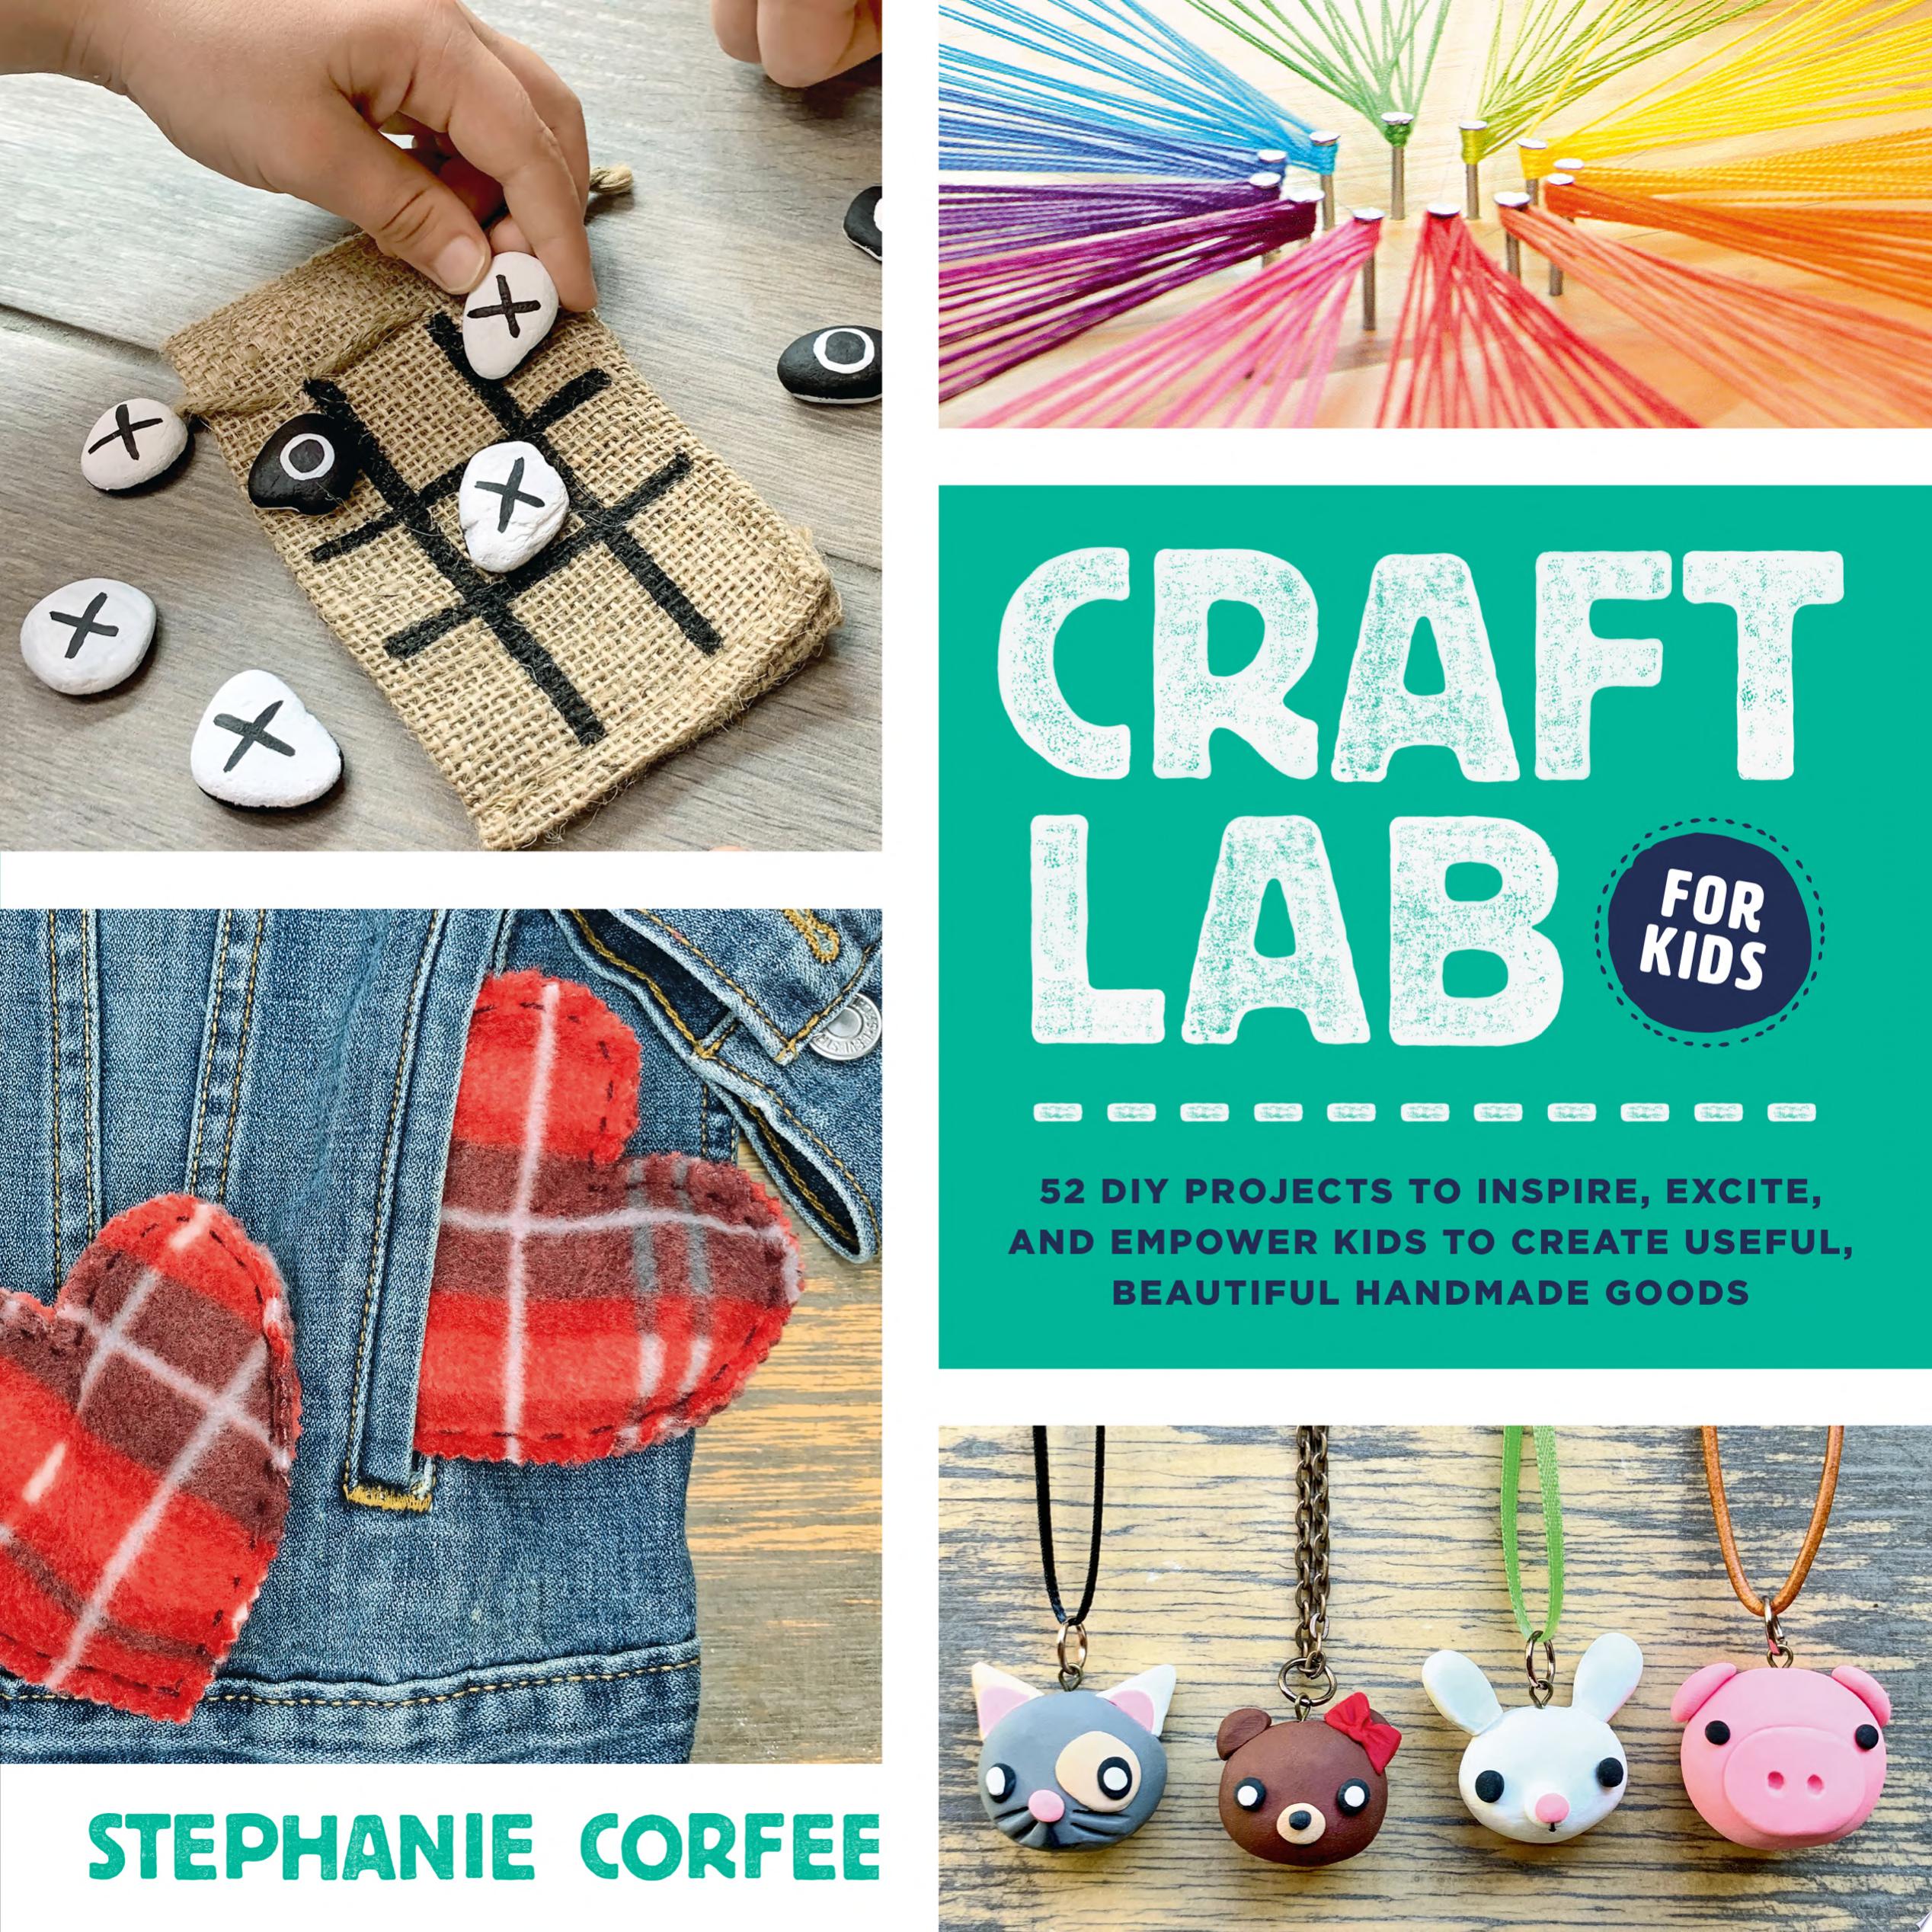 Image for "Craft Lab for Kids"